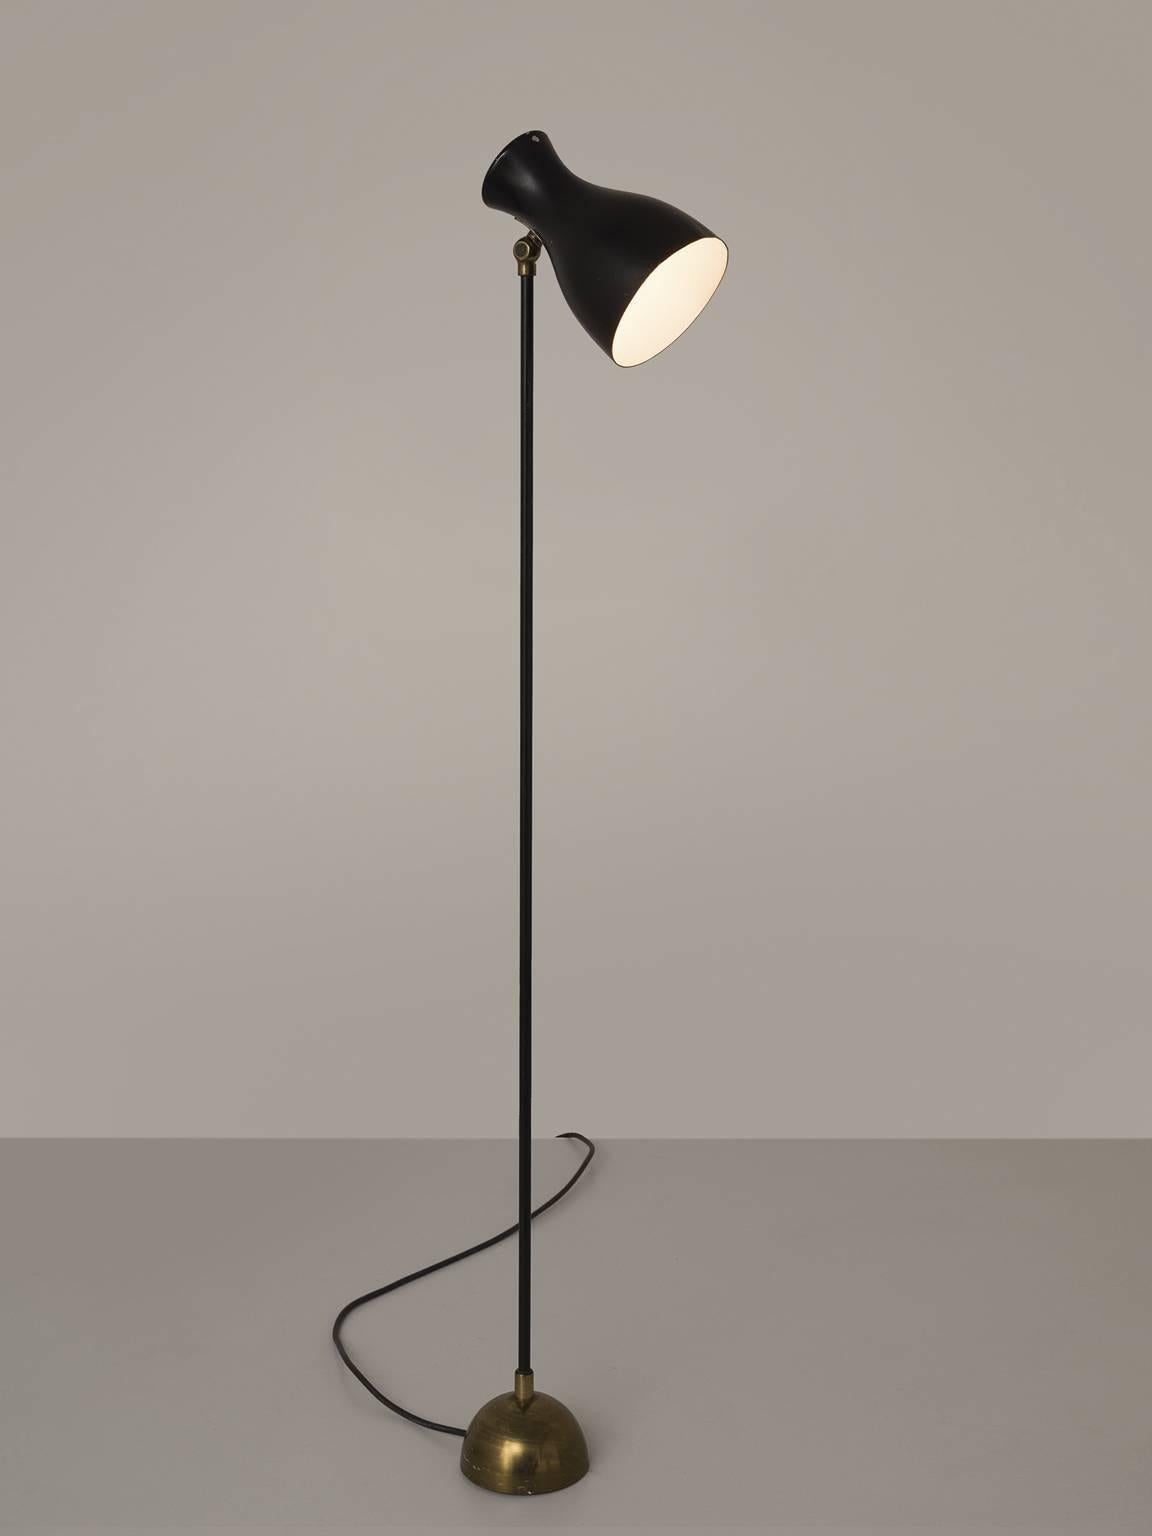 Floor lamp by Schulz for Wohnbedarf AG Schweiz, brass and lacquered metal, cast metal, tubular metal, sheet metal, painted black, Switzerland, 1957.

This delicate and modest floor lamp is designed by Schulz for Wohnbedarf AG Schweiz. The lamp,